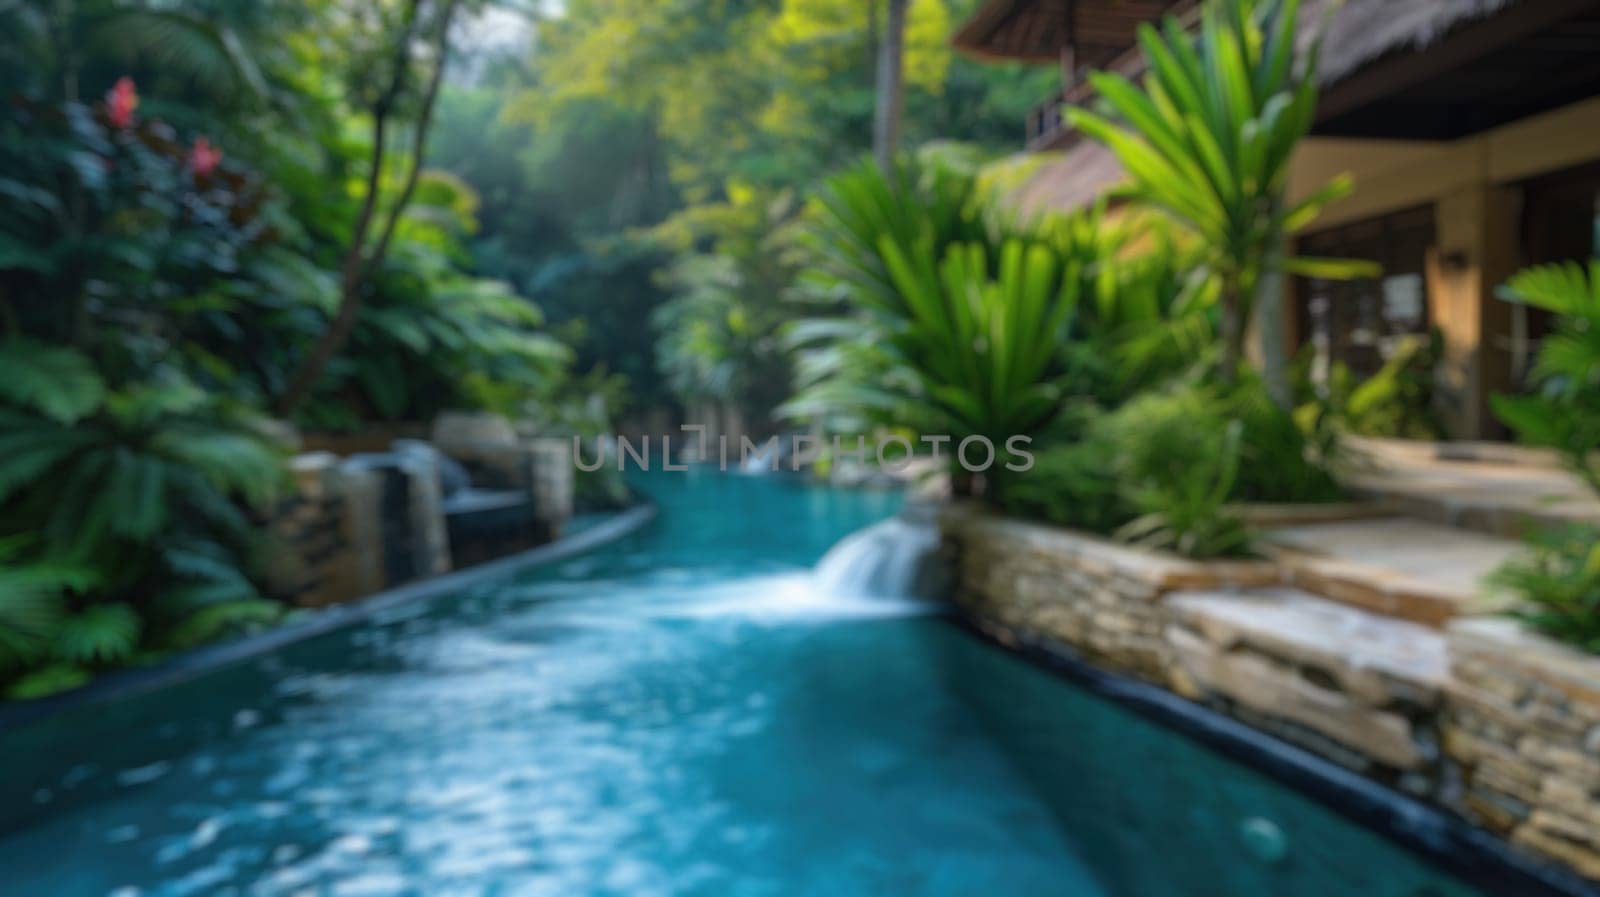 Blur background of luxurious resort spa relaxation. Resplendent. by biancoblue